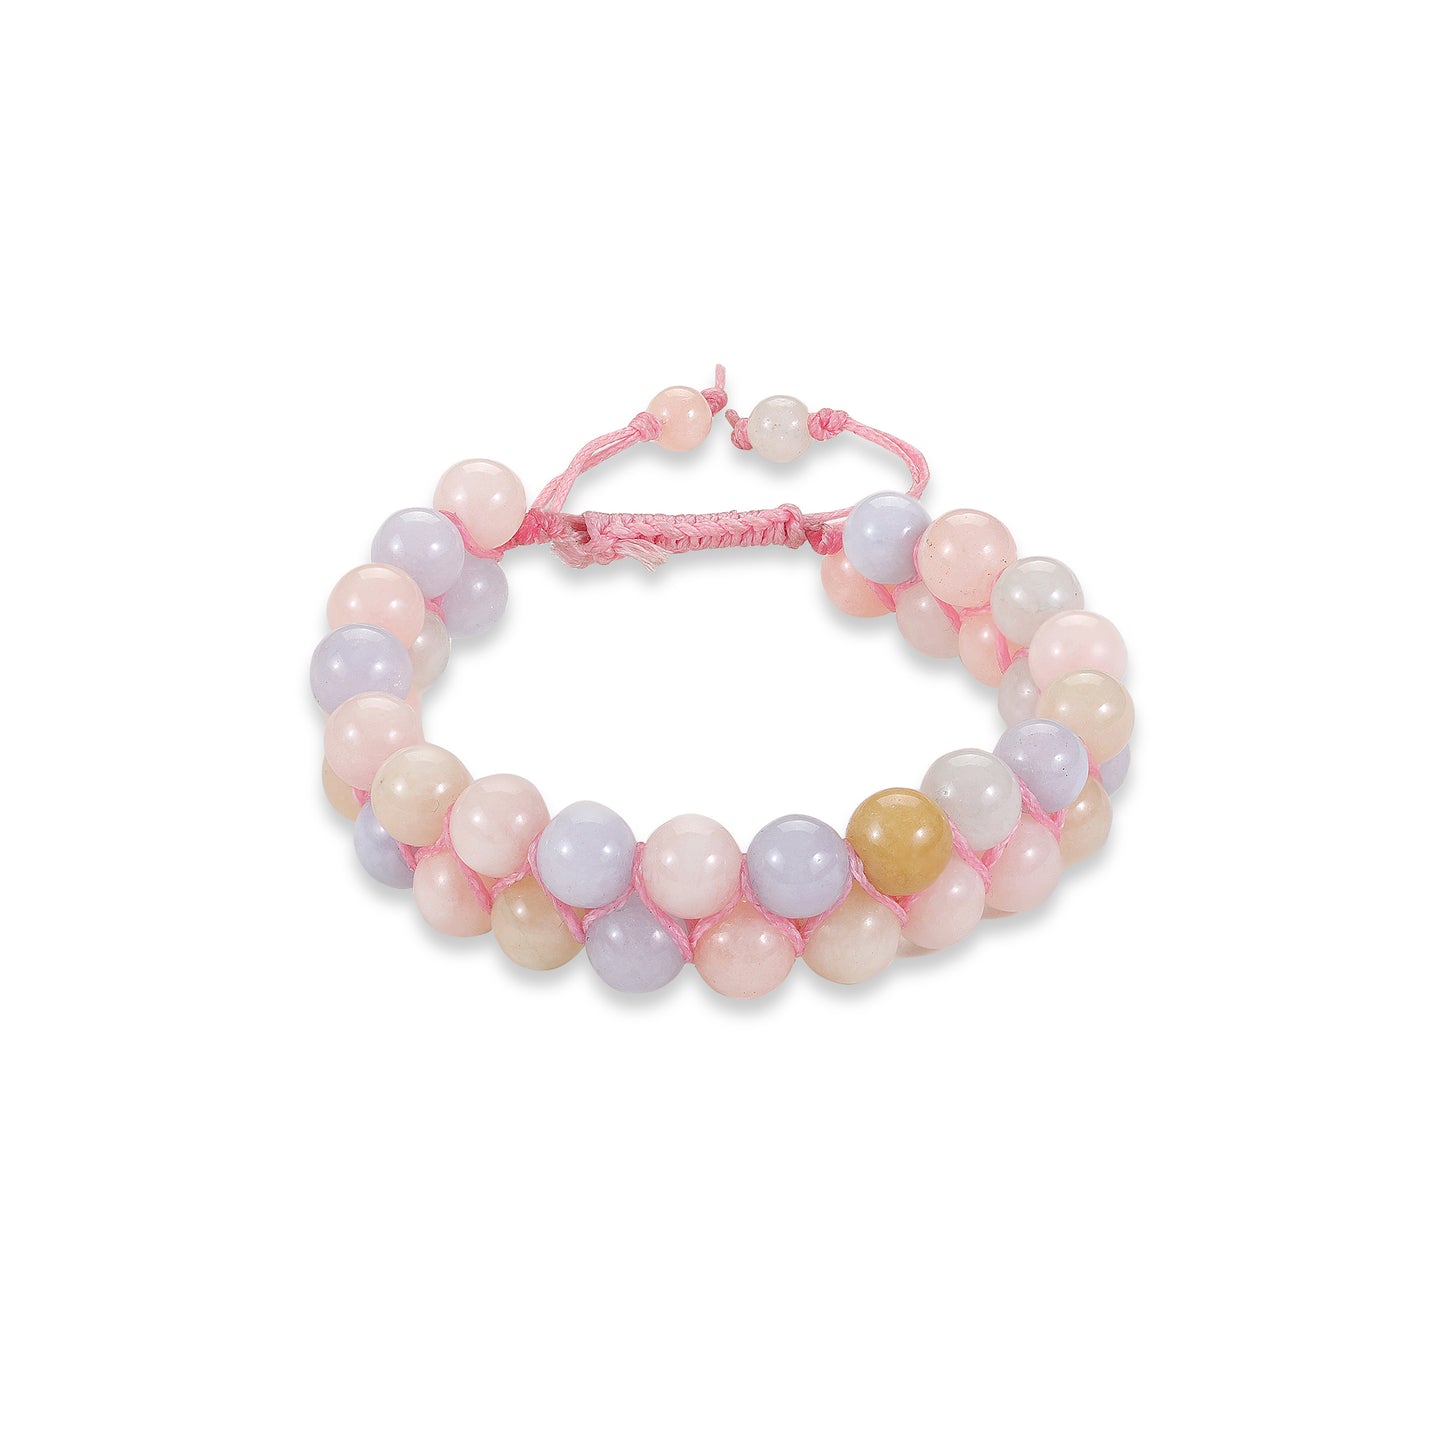 Morganite Double Layered Bracelet - Stone of Compassion